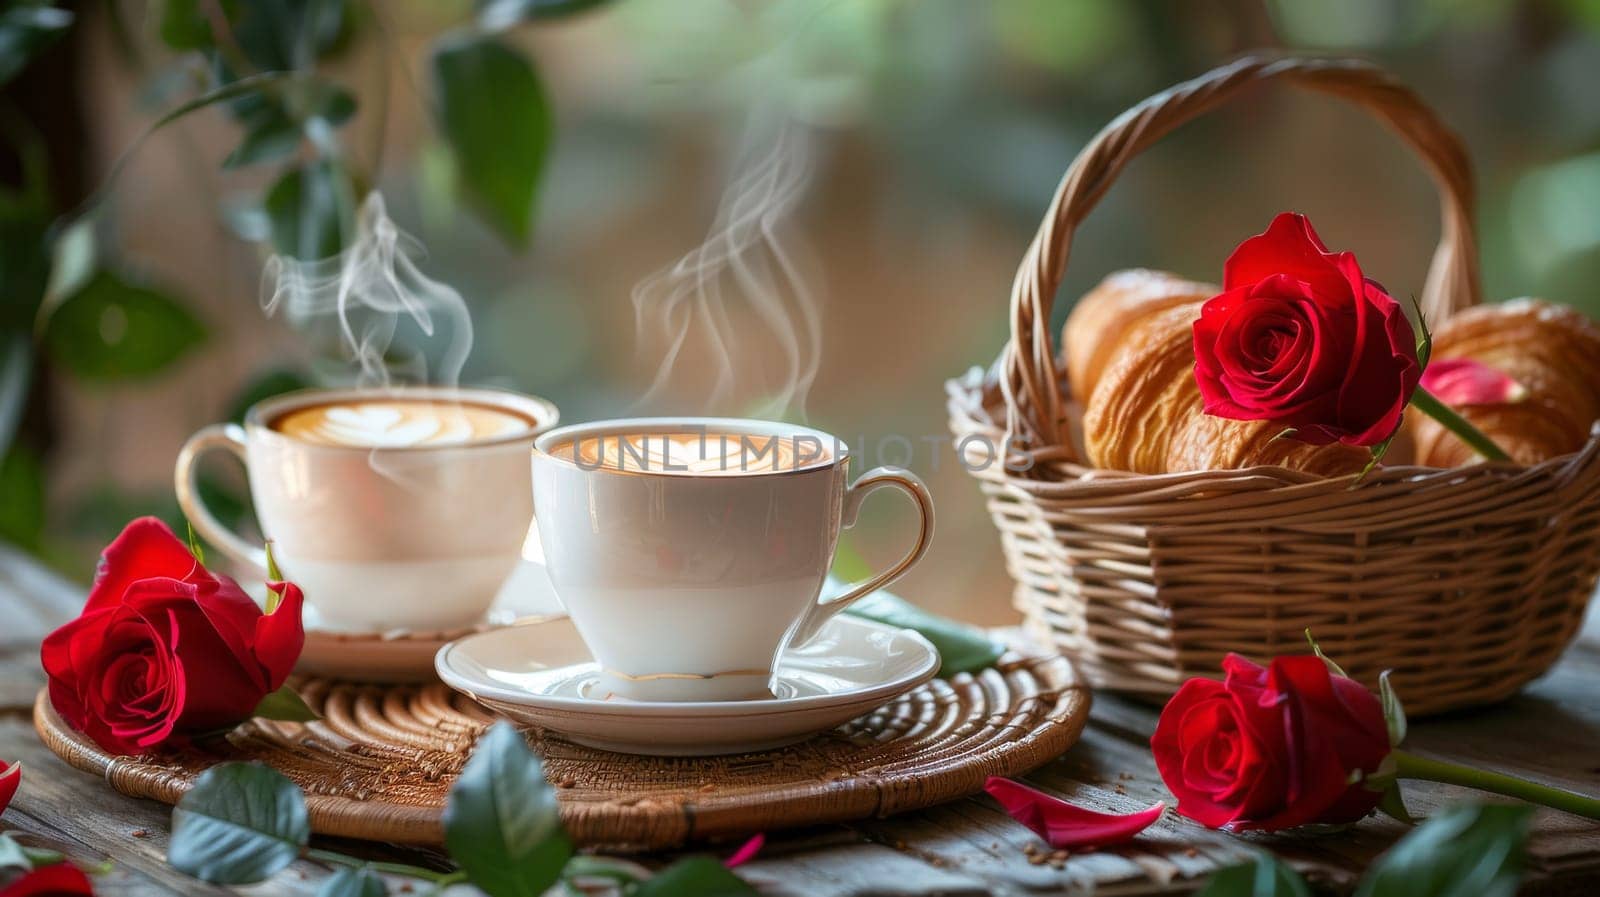 A white coffee cup with a heart on it sits on a table next to a basket of croissants and a bouquet of red roses